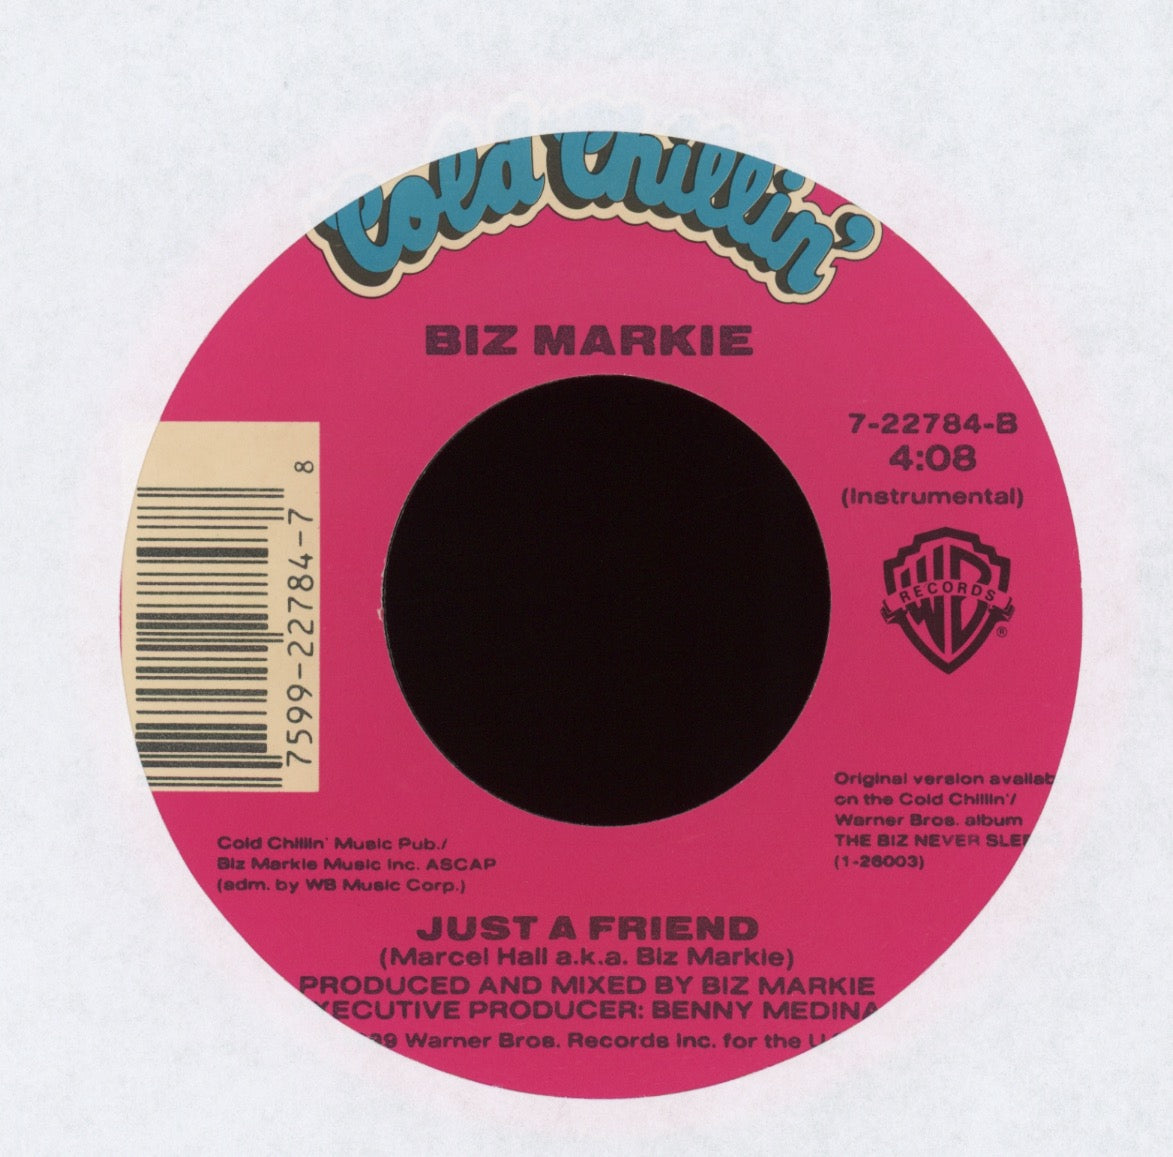 Biz Markie - Just A Friend on Cold Chillin' With Picture Sleeve